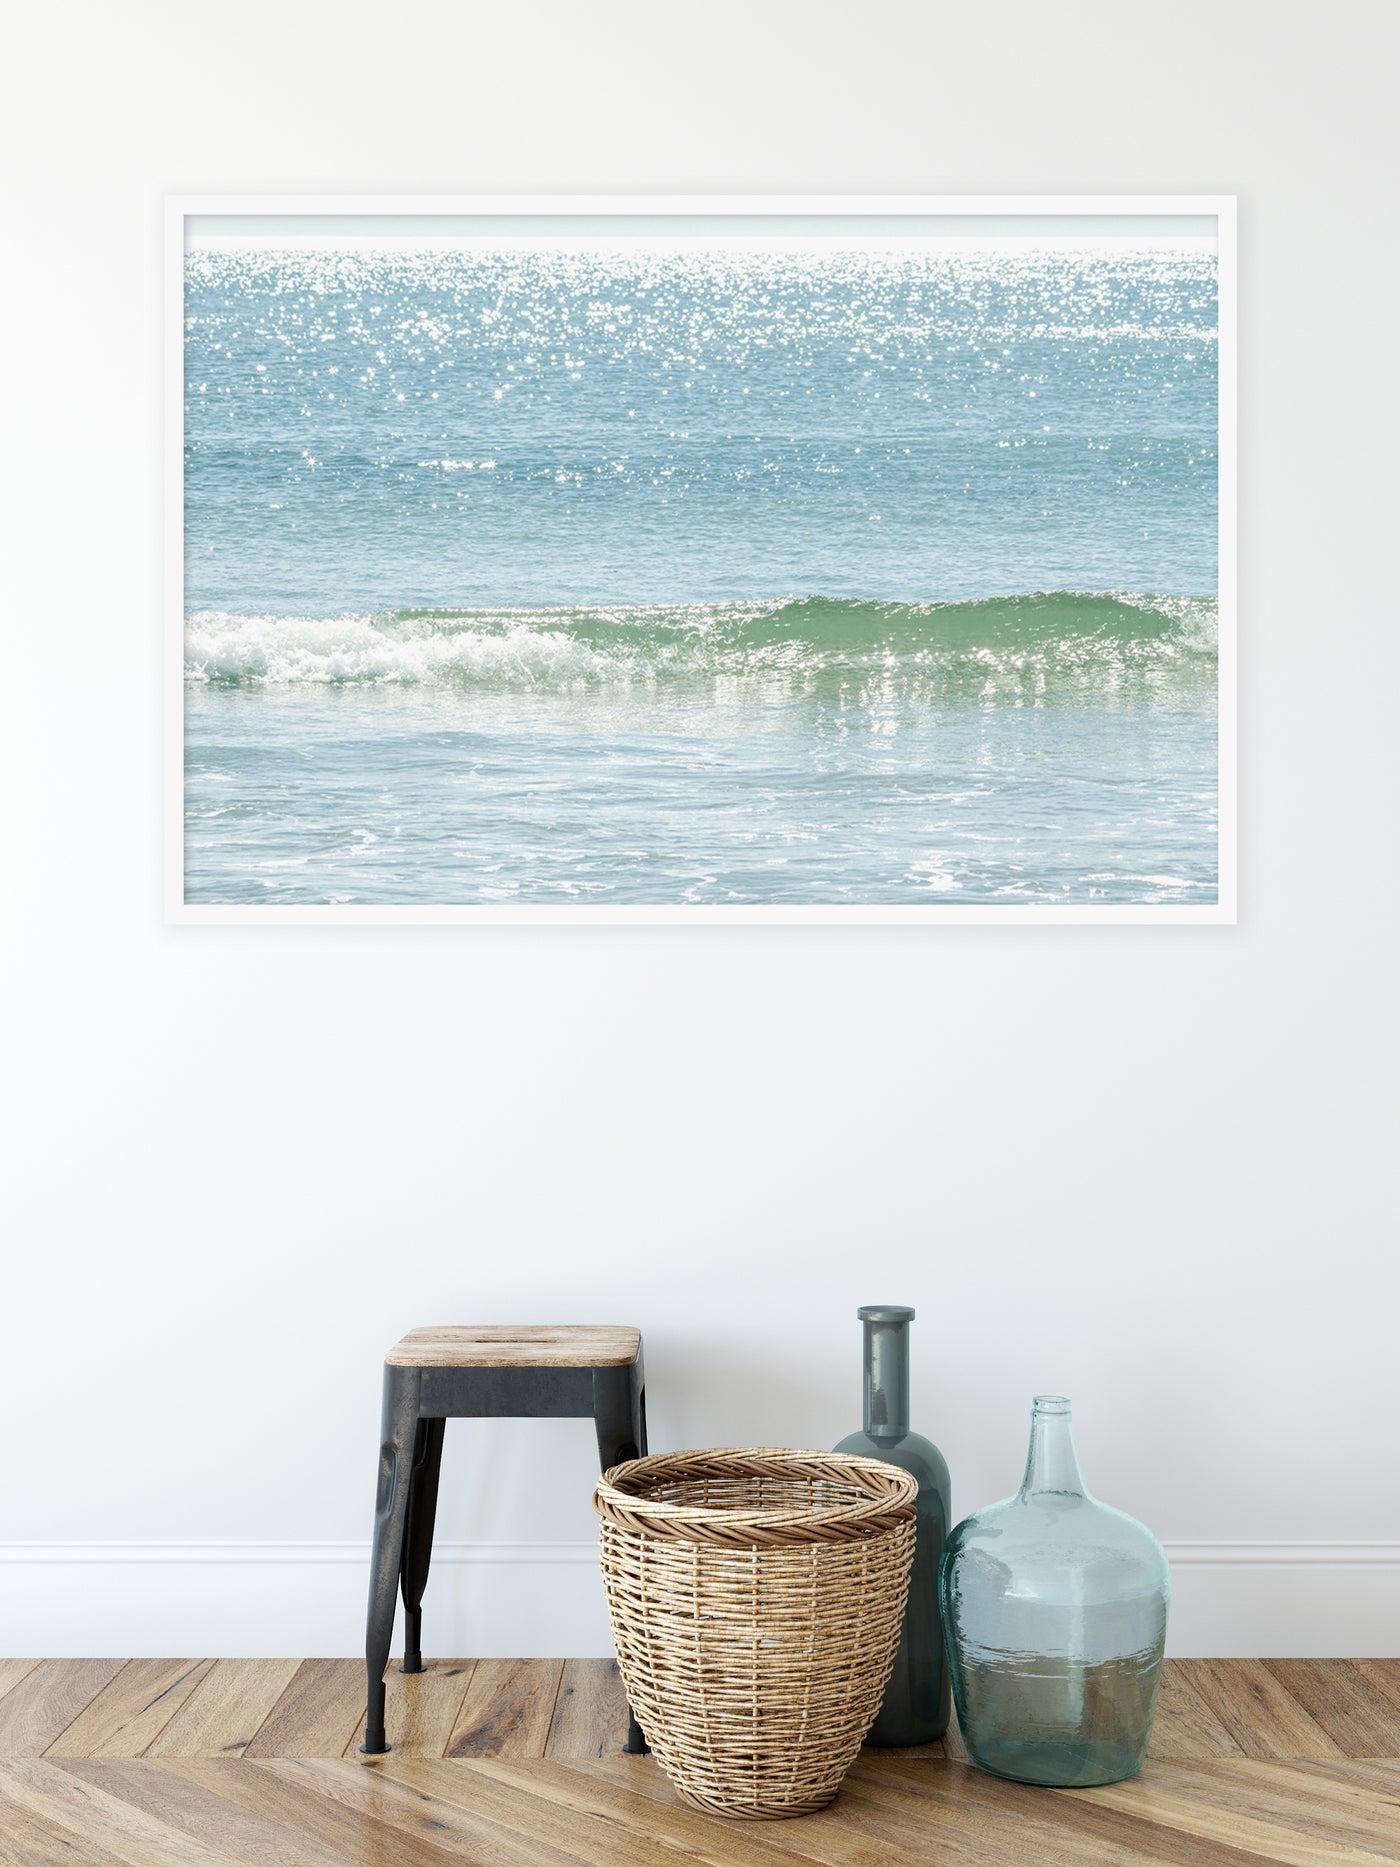 Ocean wave and sun glitter - Large art print by Cattie Coyle Photography